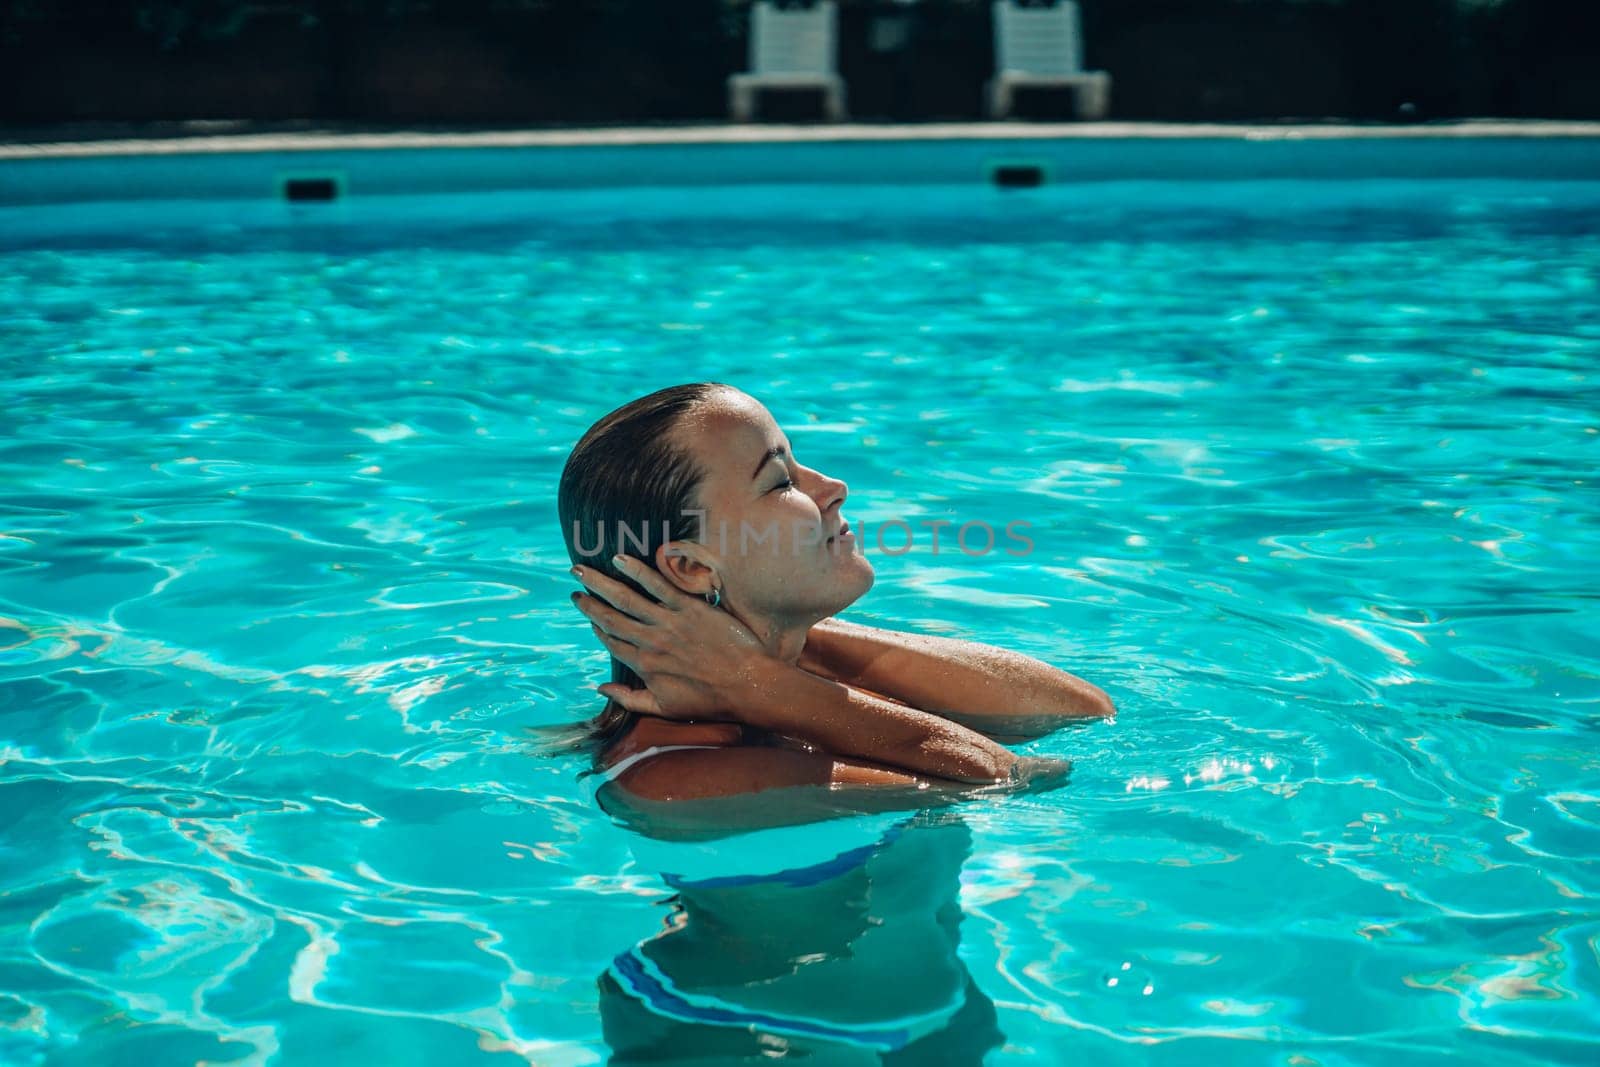 A woman is swimming in a pool. She is smiling and enjoying the water